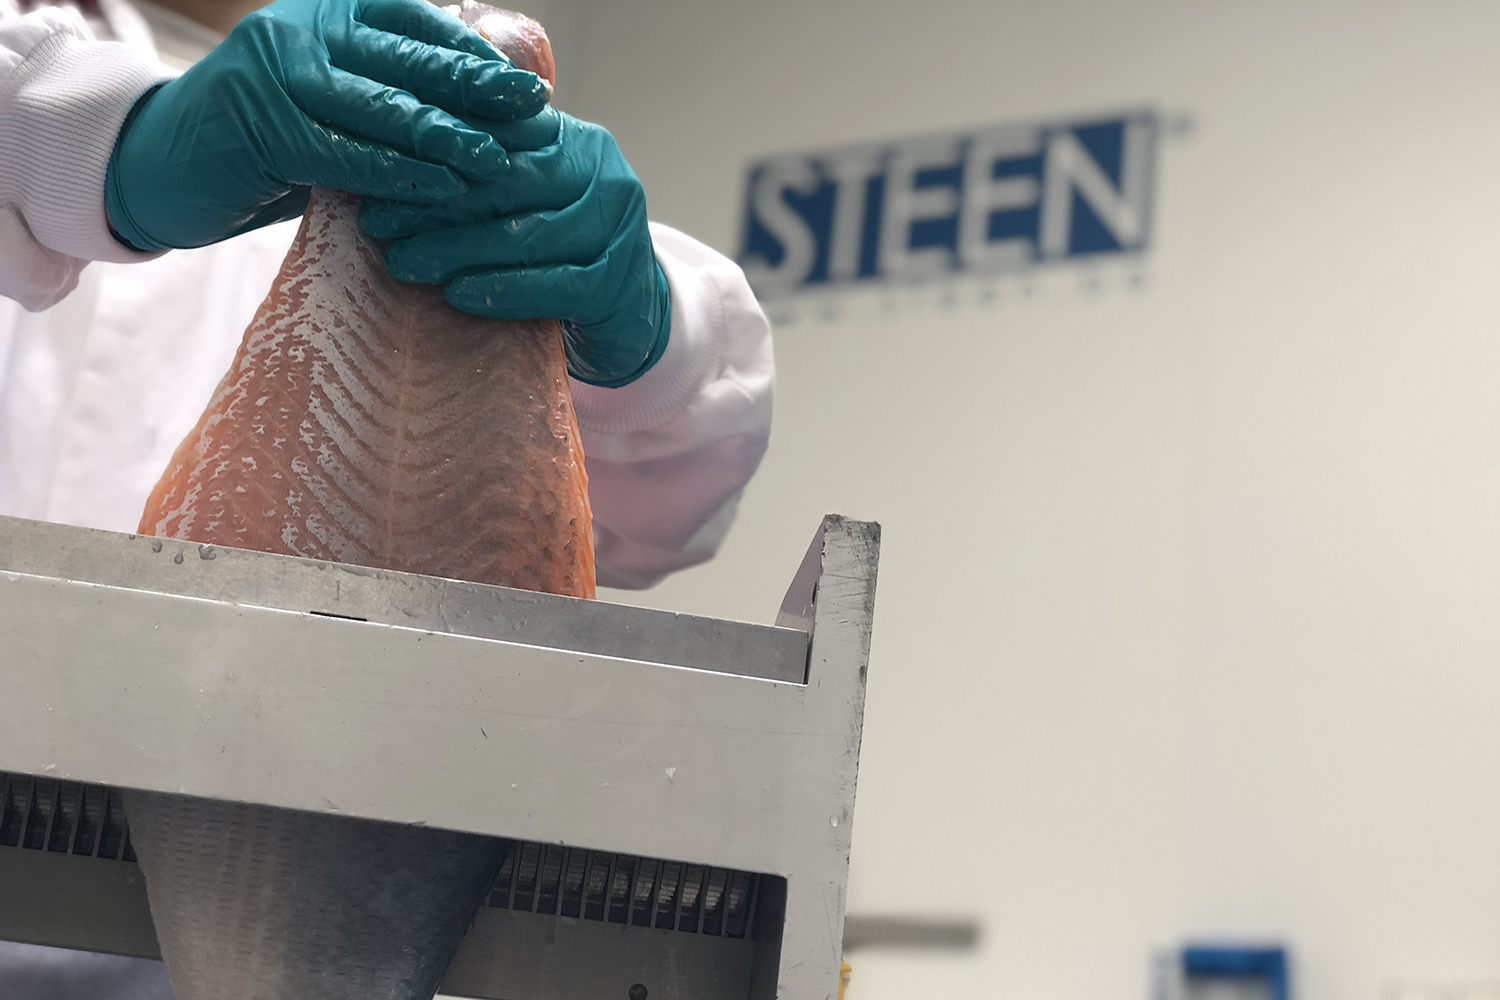 There's only one way to skin a fish: A STEEN machine - Responsible Seafood  Advocate